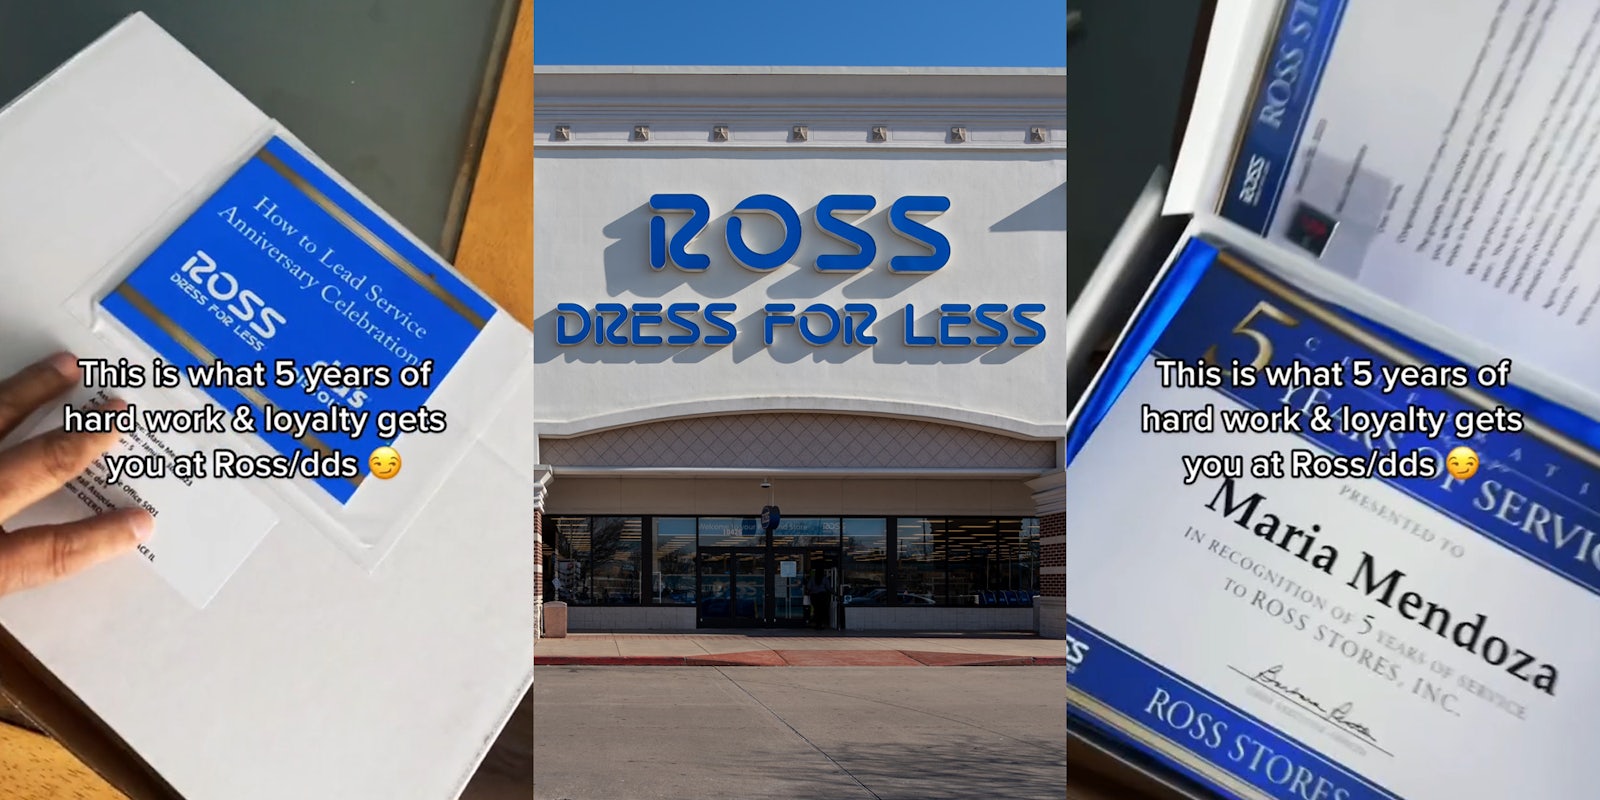 hand on box with Ross label and caption 'This is what 5 years of hard work an d loyalty gets you at Ross/dds' (l) Ross Dress For Less sign on building (c) Ross paper award for employee with caption 'This is what 5 years of hard work an d loyalty gets you at Ross/dds' (r)